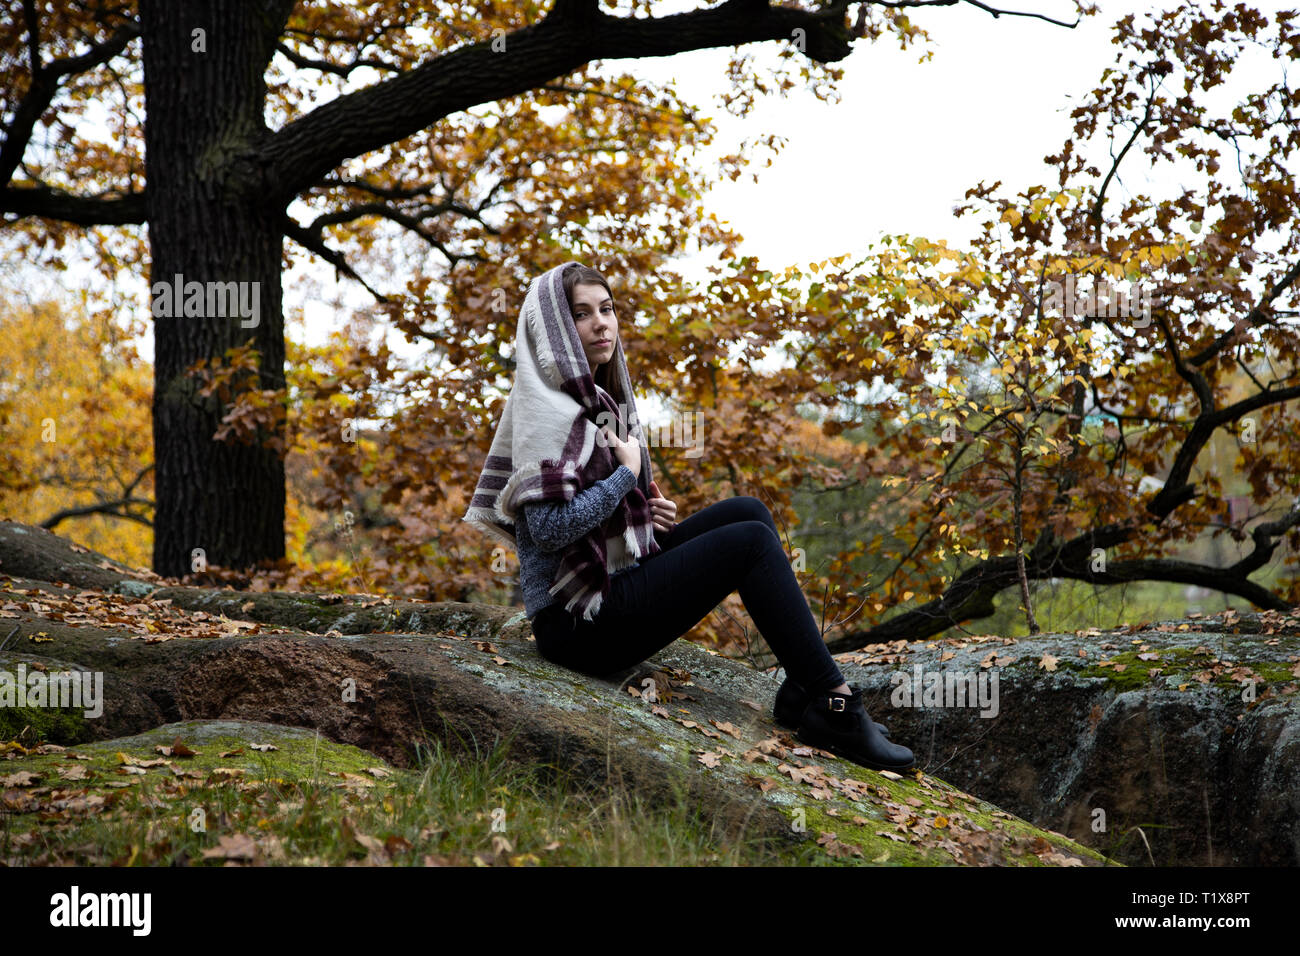 A cute, beautiful, modest religion girl with a scarf or scarf on her head is sitting in the autumn in a park on a stone. Moss and yellow leaves around Stock Photo